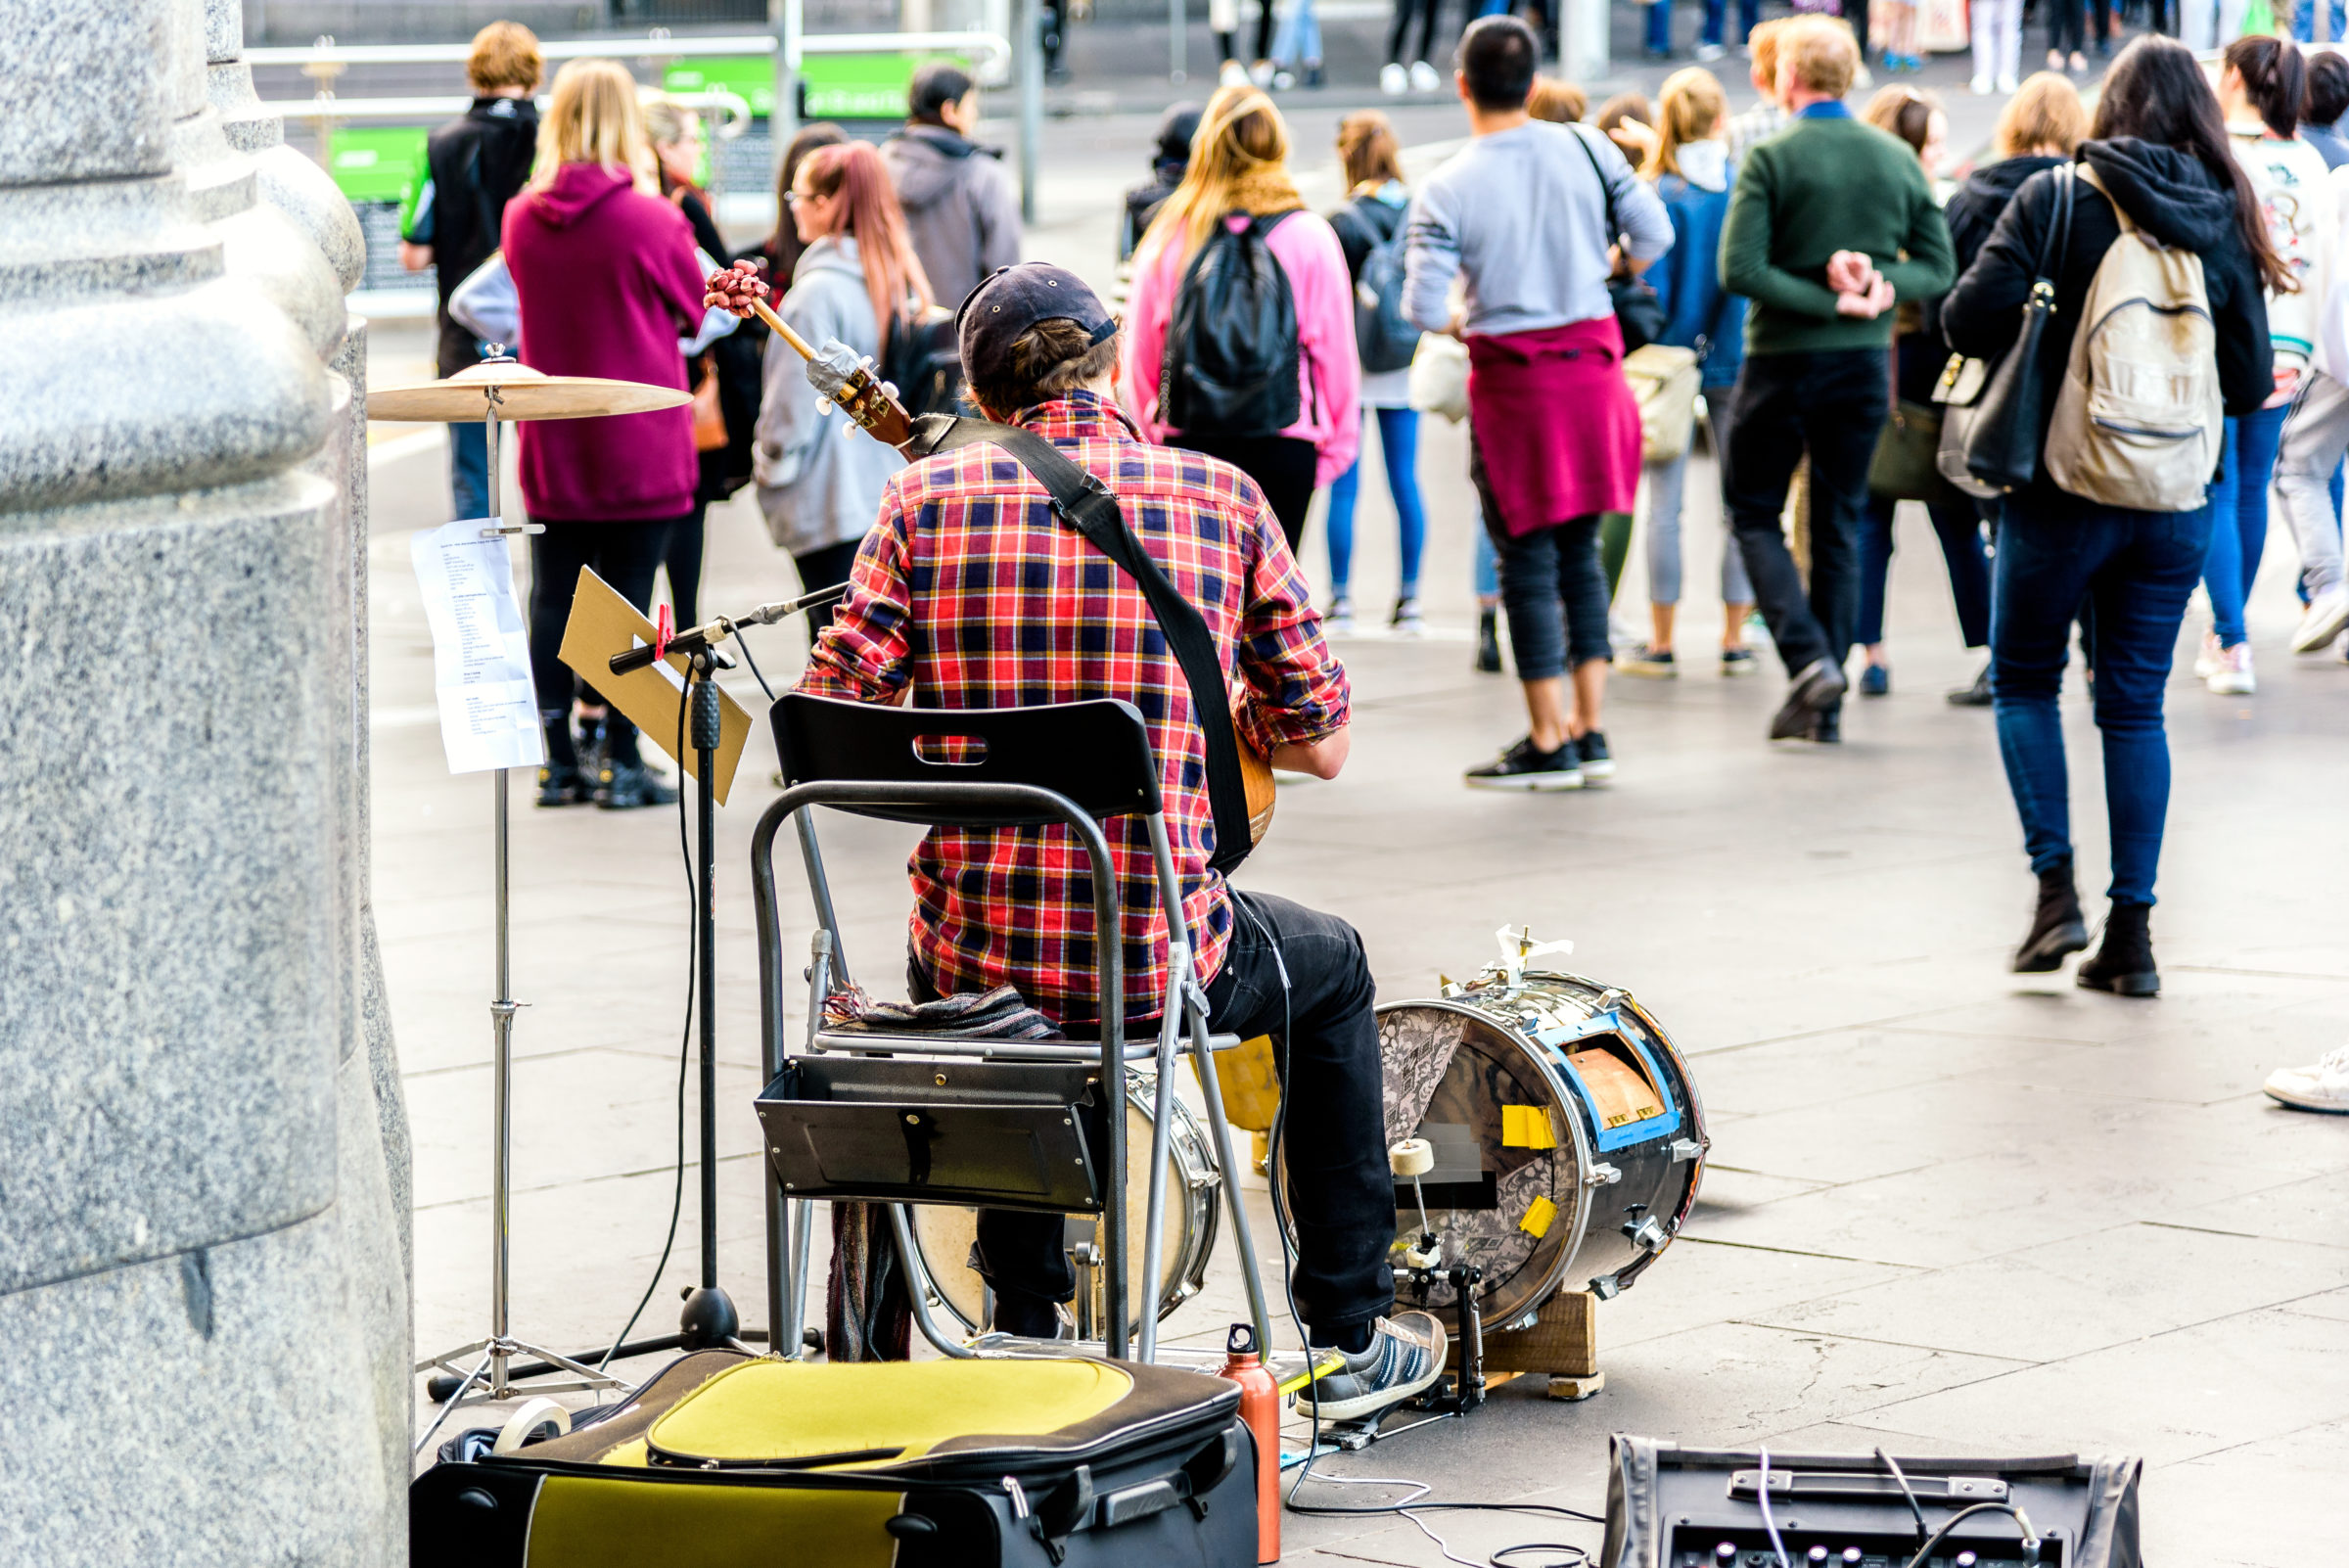 Melbourne, Victoria, Australia, May 26th 2018: A solo busker is sitting in front of the Flinders Street Train Station